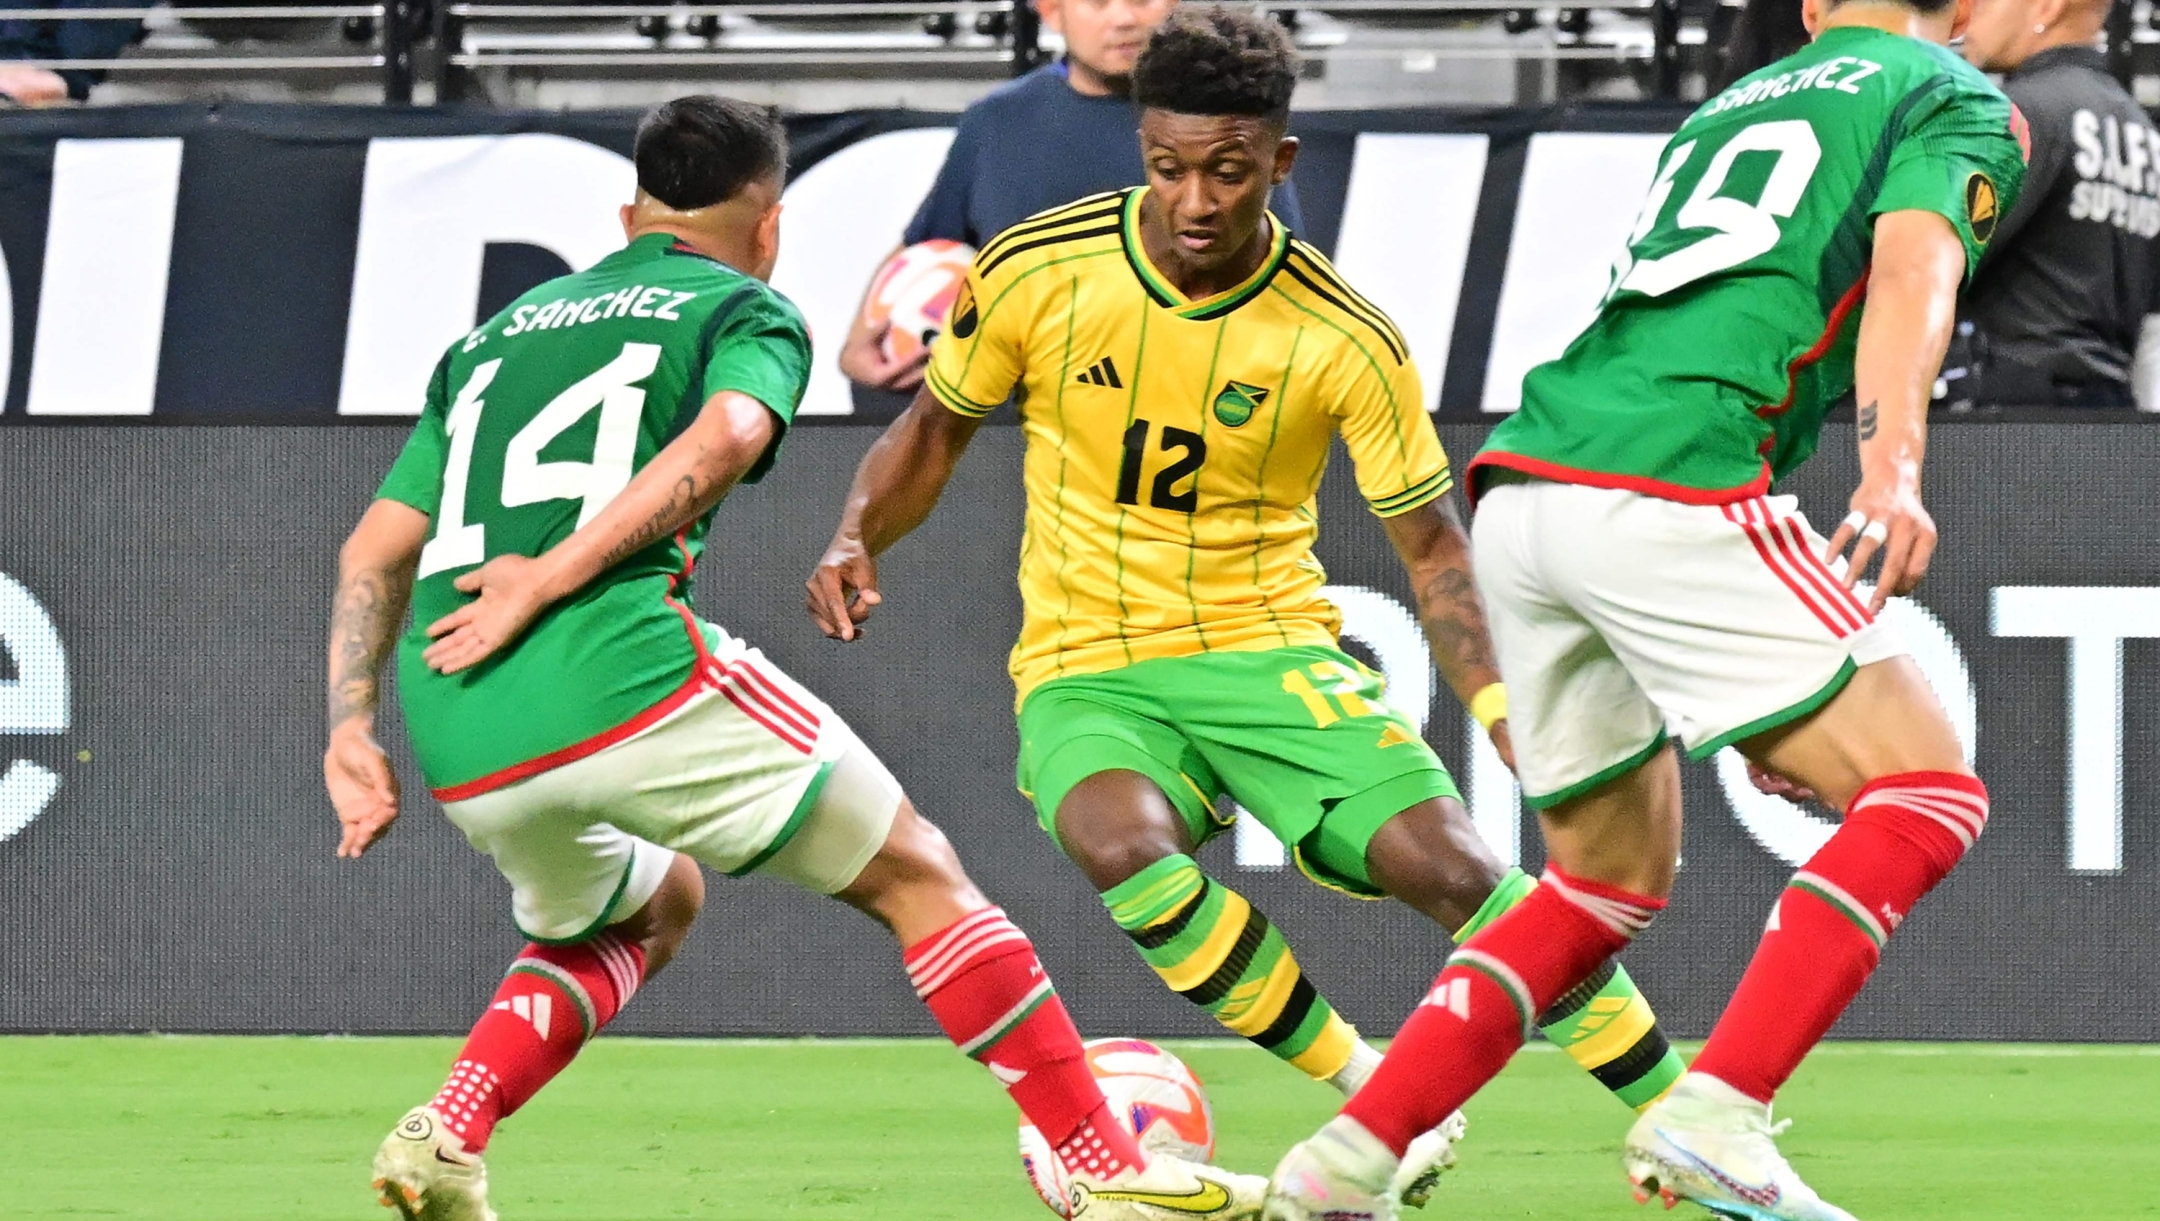 Jamaica's forward Demarai Gray (C) fights for the ball with Mexico's forward Erick Sanchez (R) and Mexico's defender Jorge Sanchez (R) during the Concacaf 2023 Gold Cup semifinal football match between Mexico and Jamaica at Allegiant Stadium in Las Vegas, Nevada on July 12, 2023. (Photo by Frederic J. BROWN / AFP)